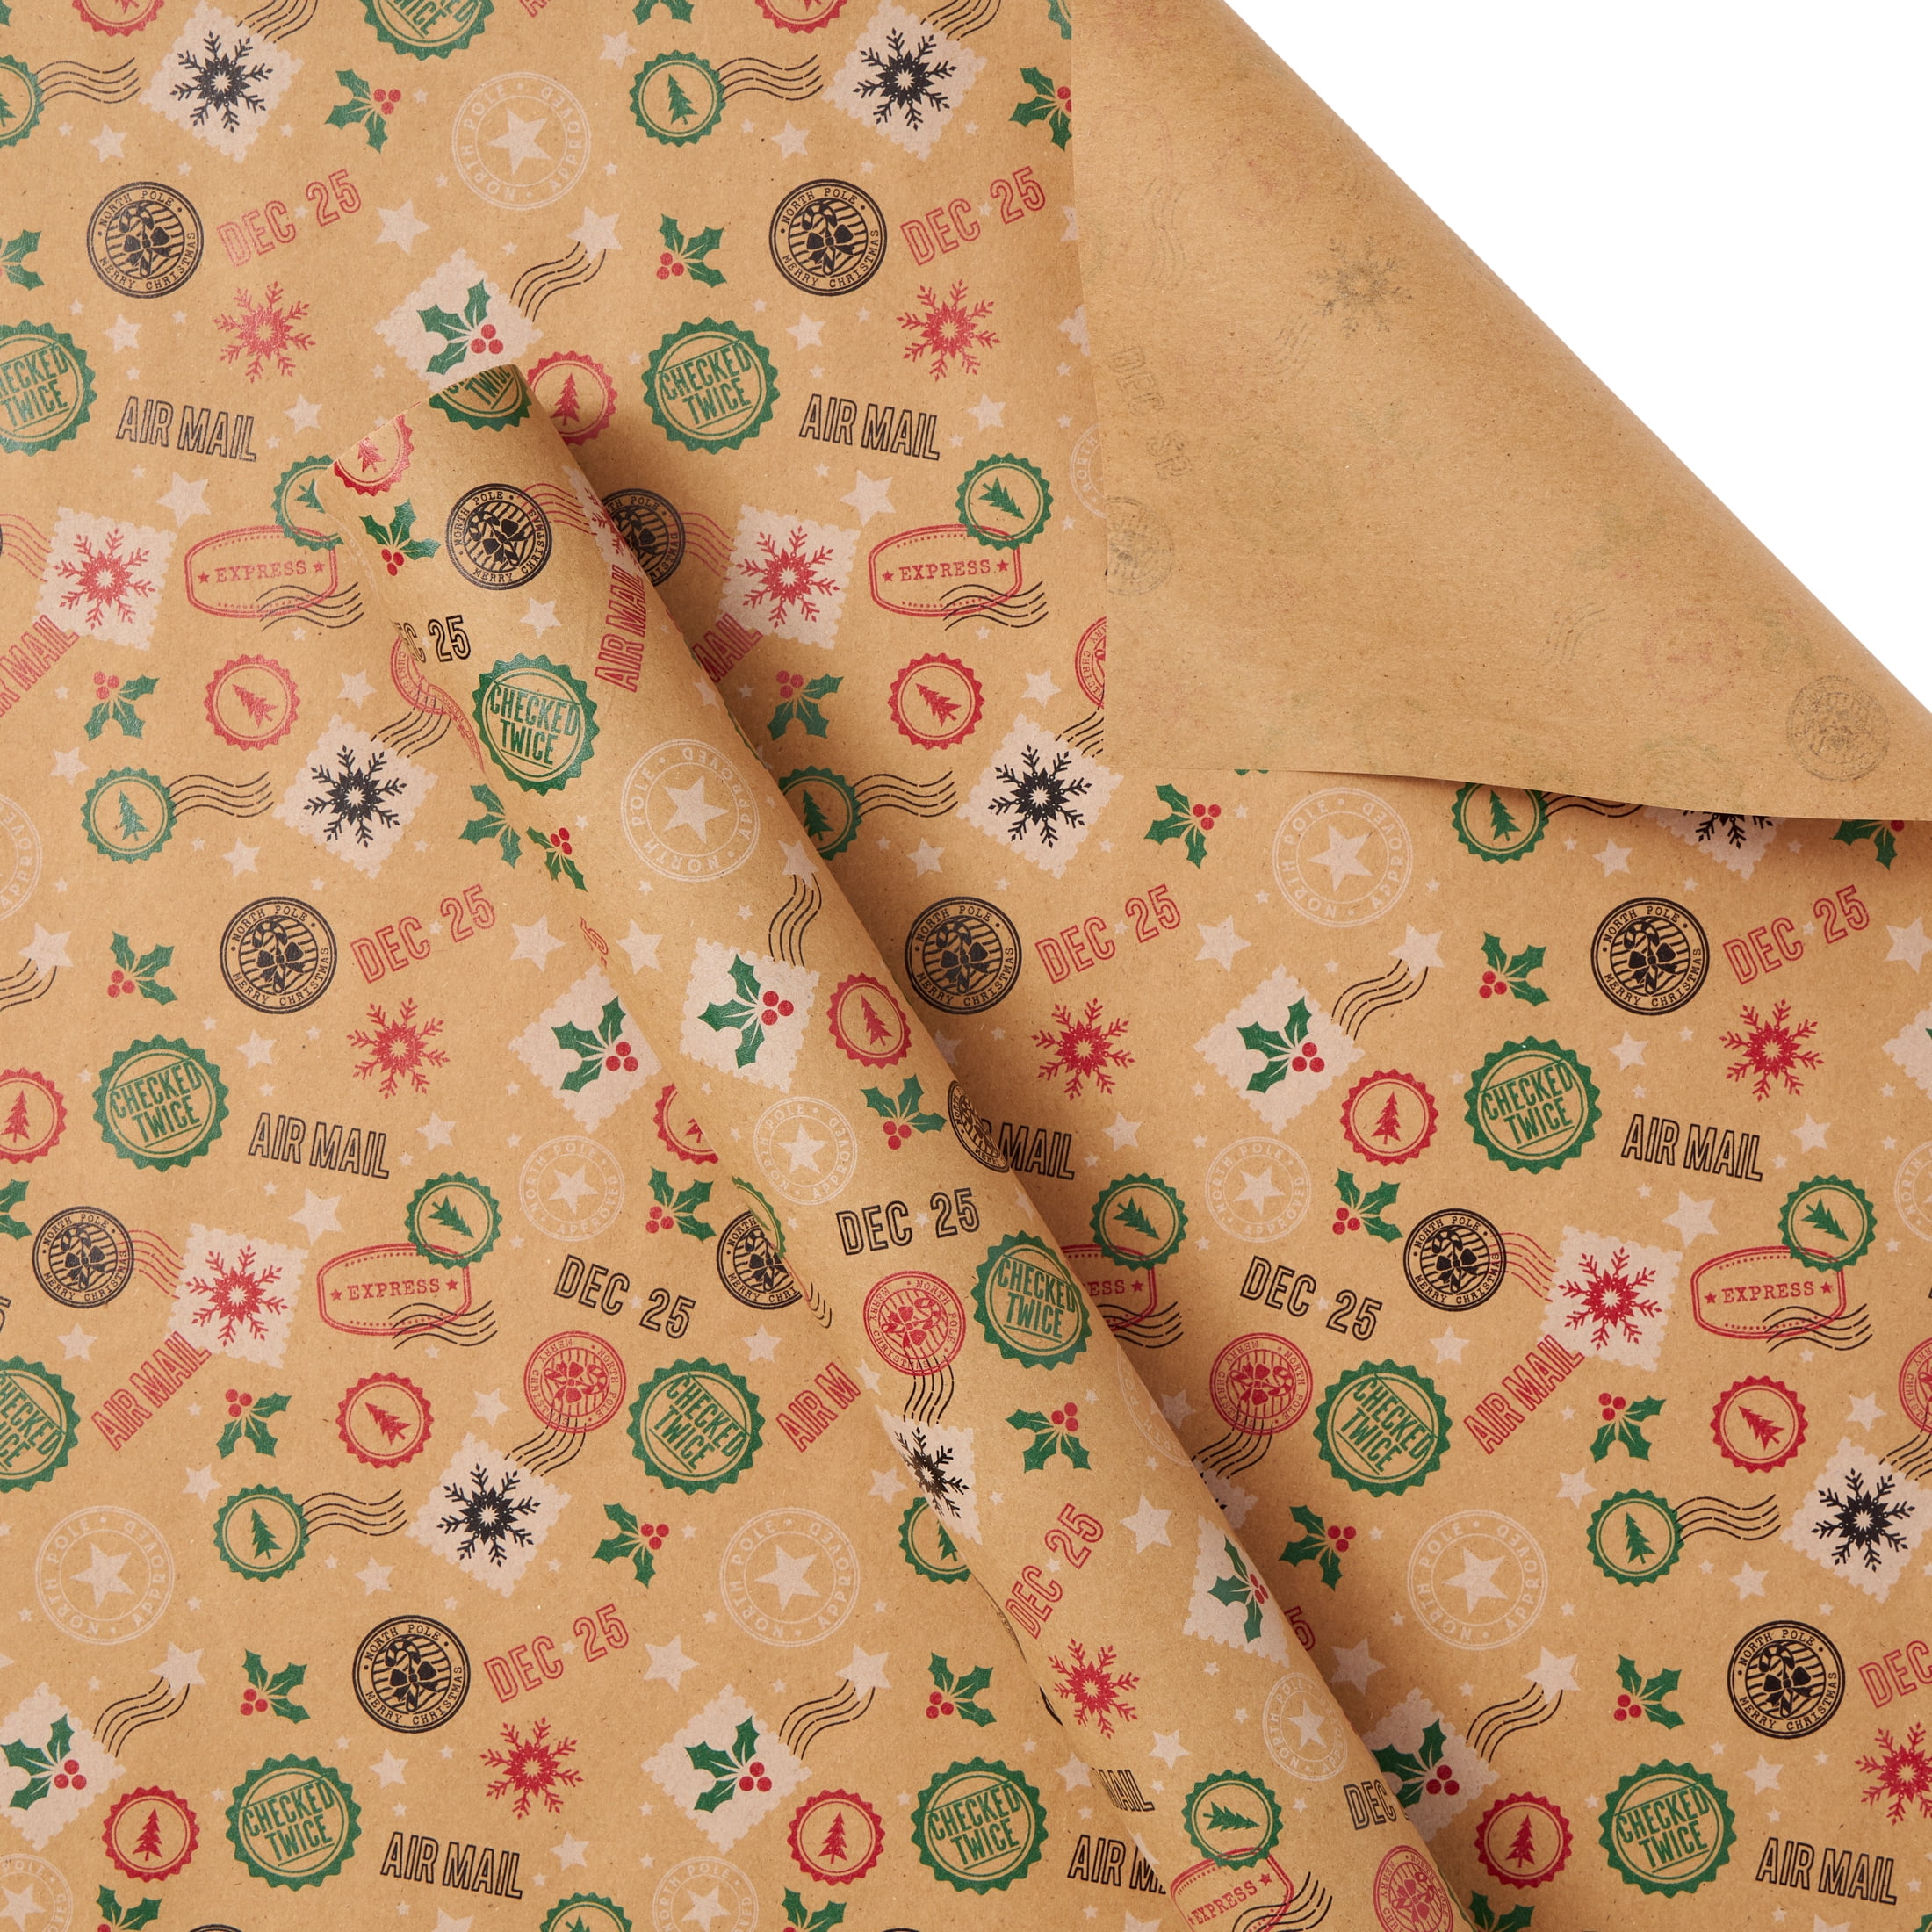 Wrap it Up #7: Kraft paper and stamp gift wrap - C.R.A.F.T.